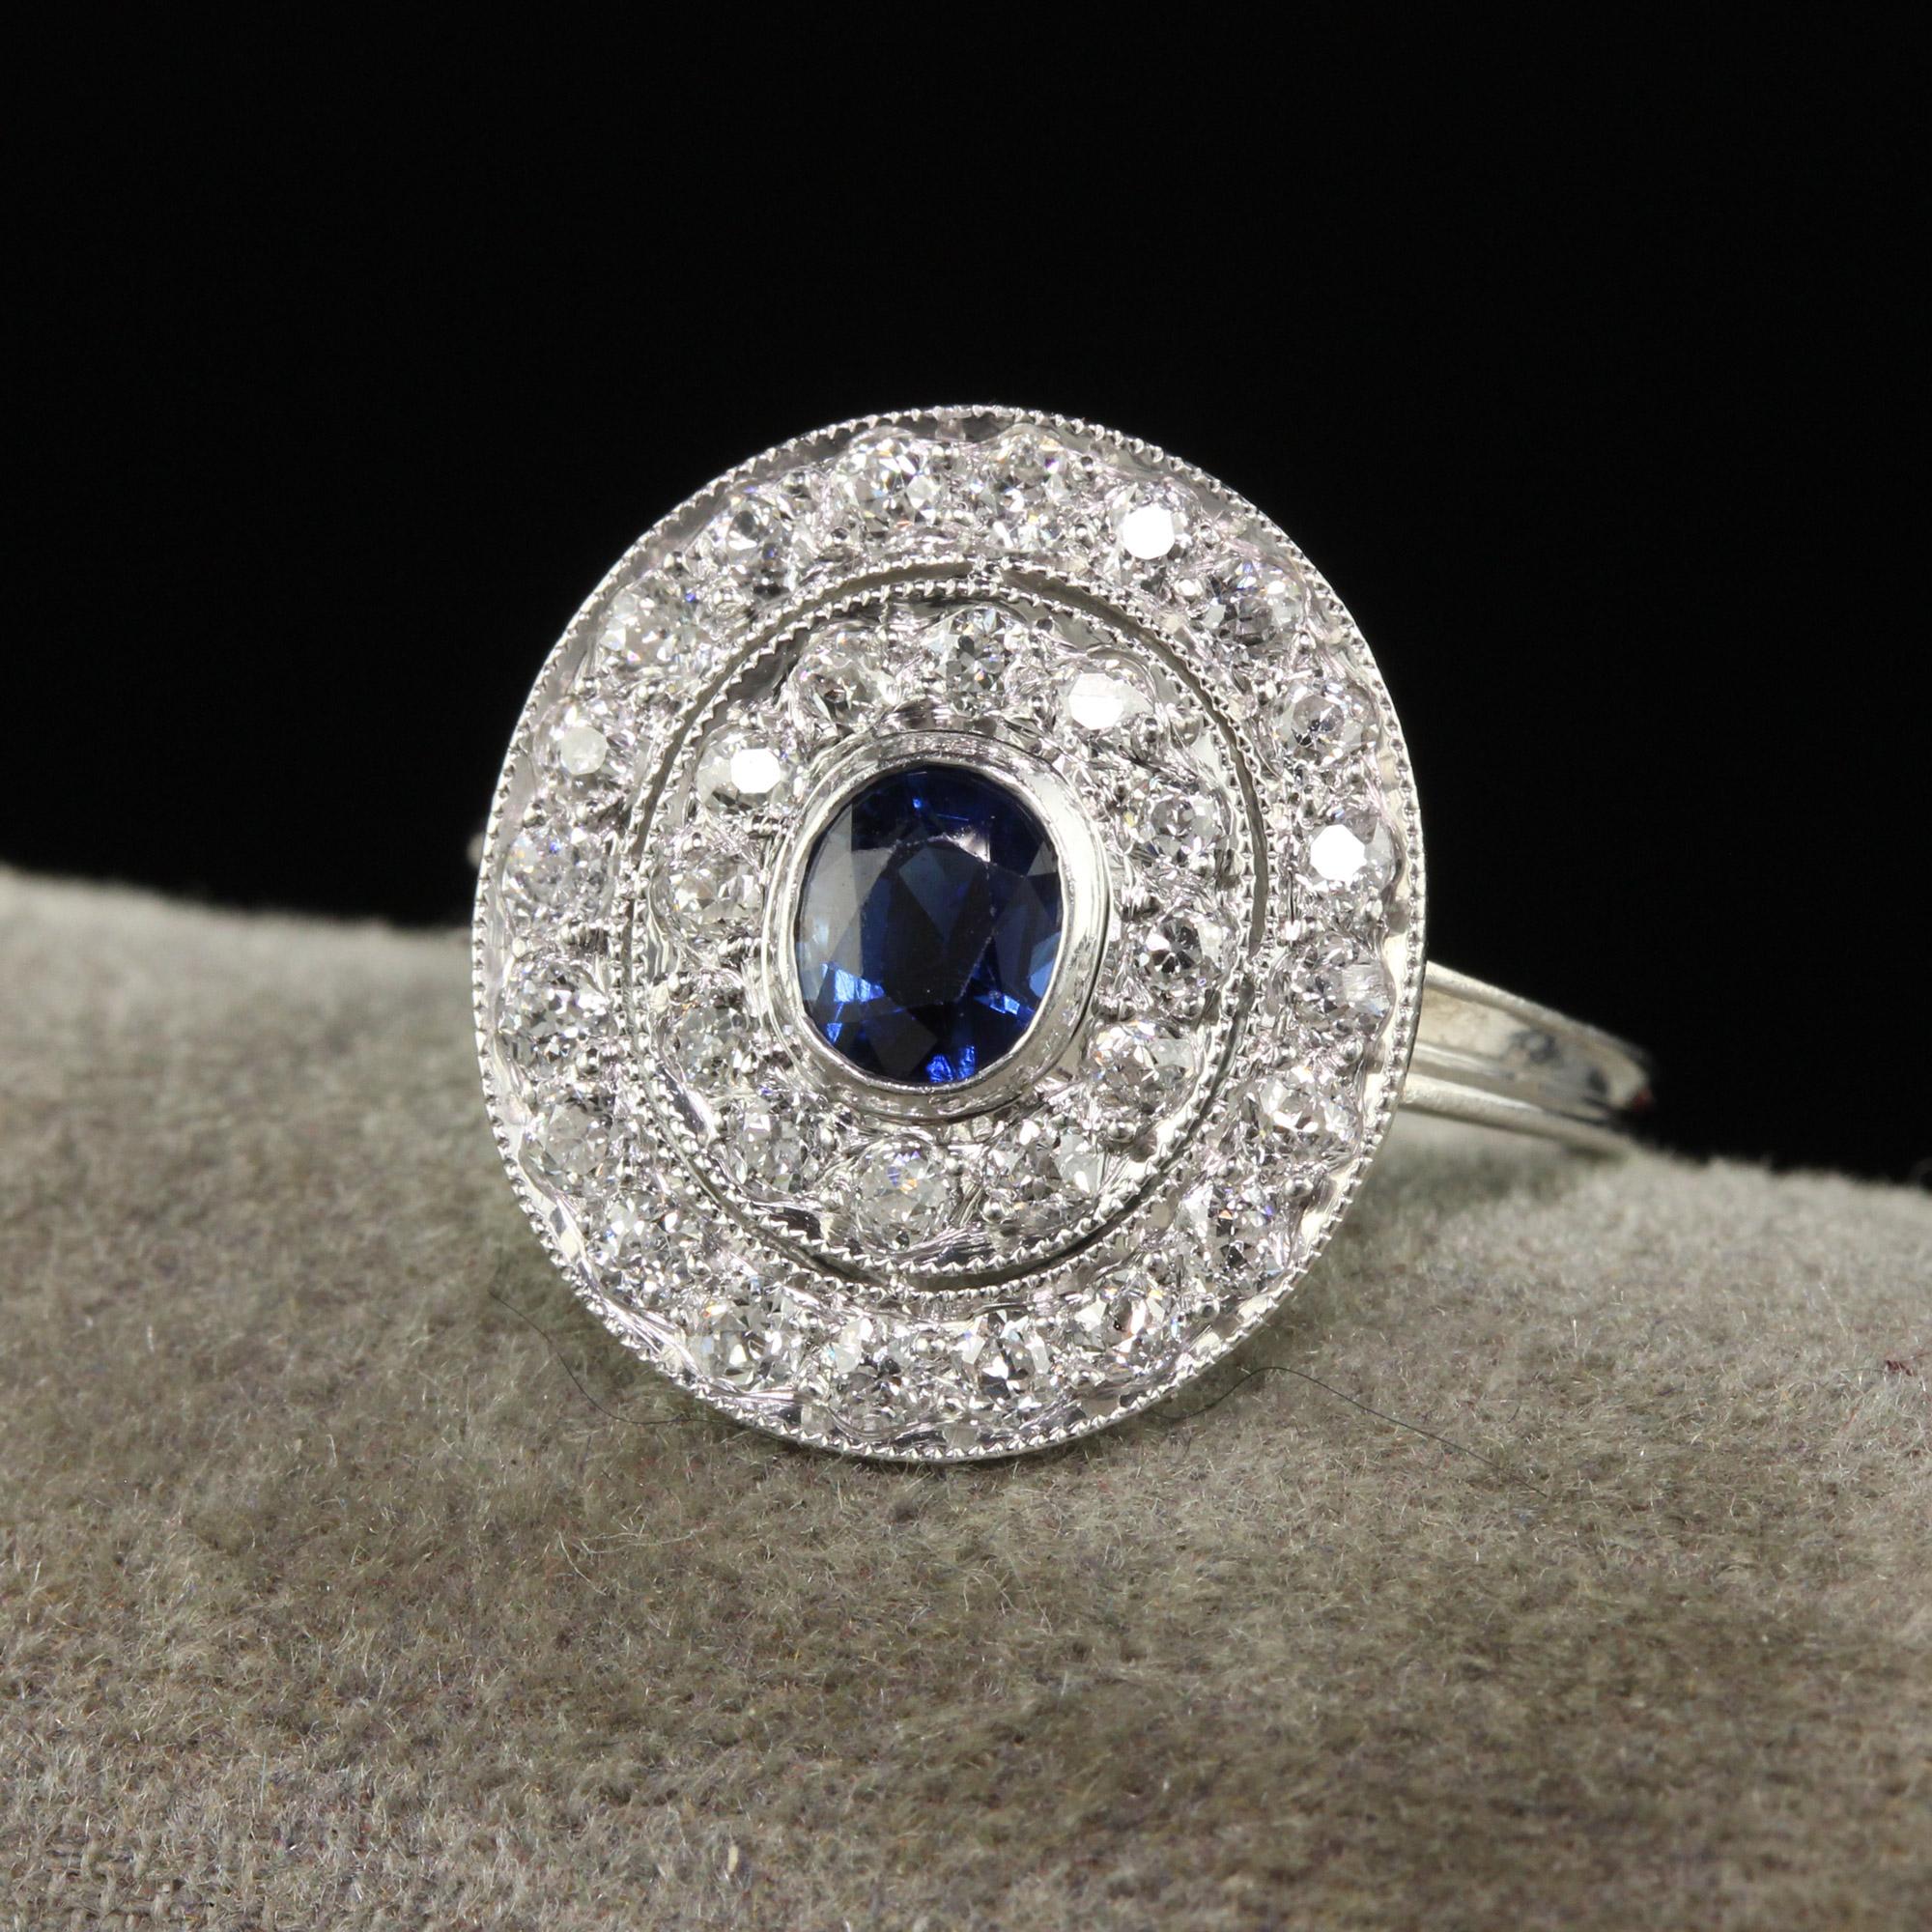 Beautiful Antique Edwardian Platinum Old Mine Diamond and Sapphire Engagement Ring. This gorgeous engagement ring is crafted in platinum. The center holds a natural blue sapphire in the center and has two rows of old mine cut diamonds going around